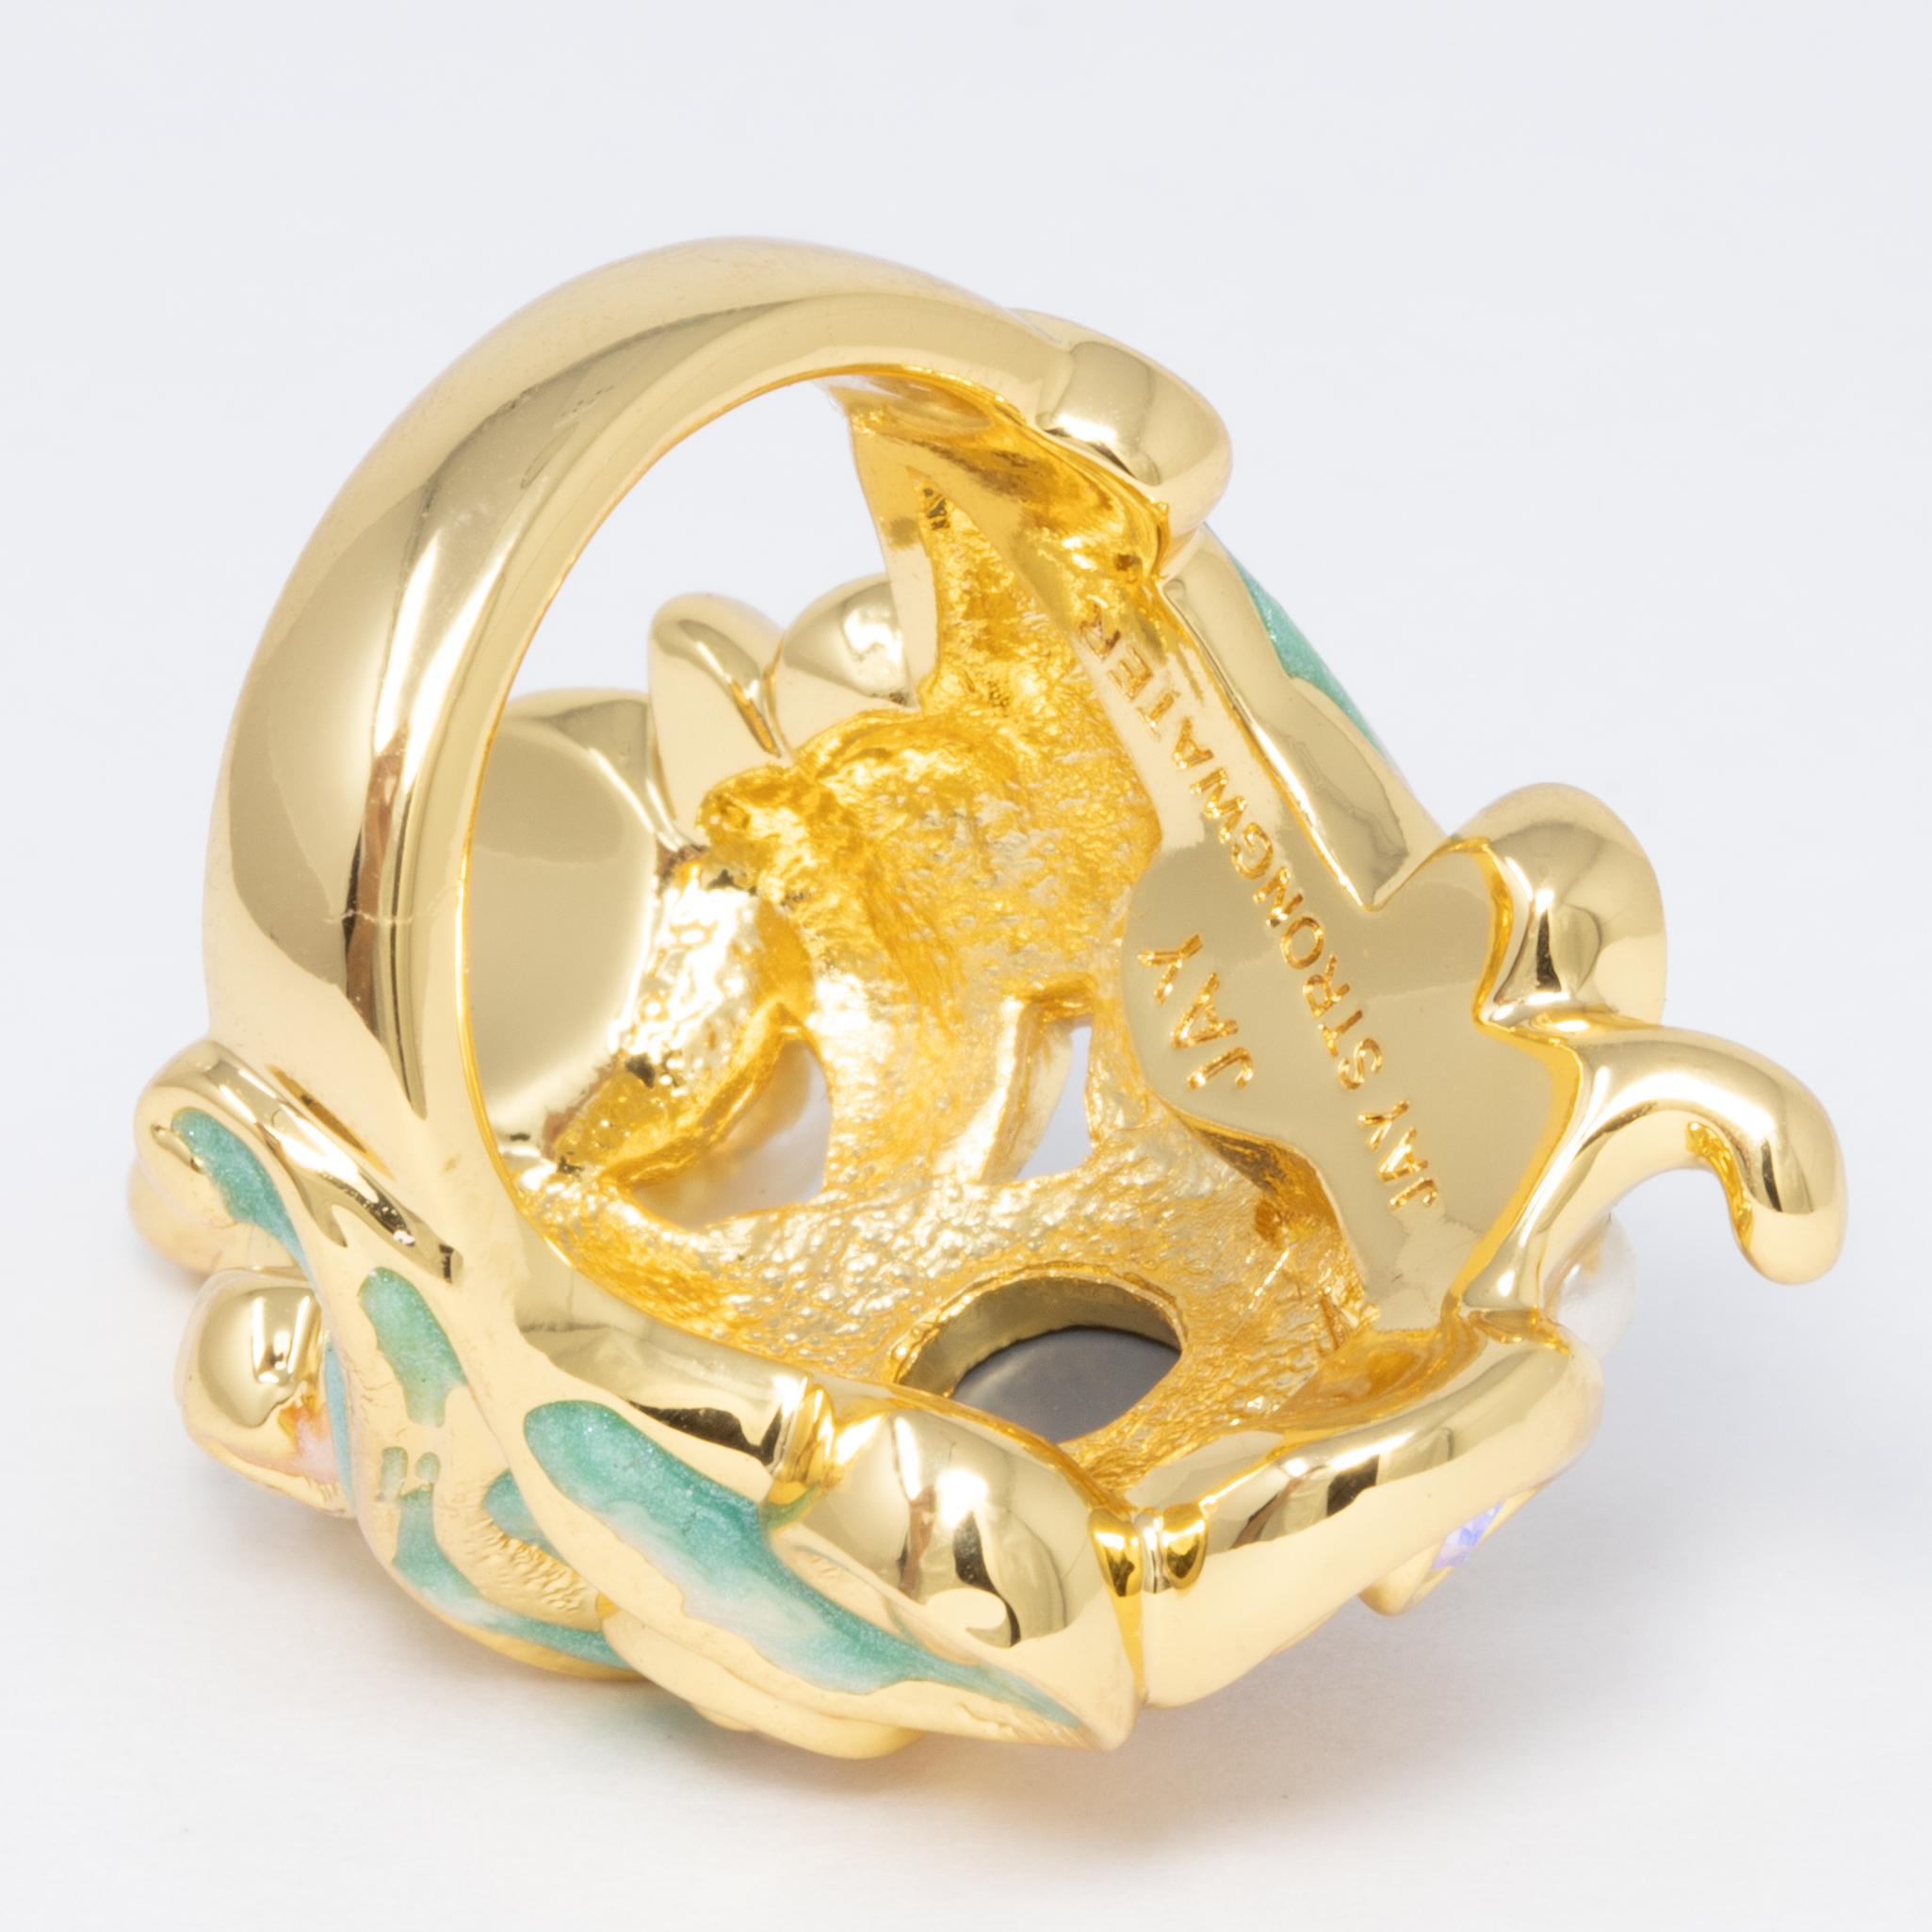 Baroque Revival Jay Strongwater Gold Beauty and the Beast Baroque Cocktail Ring, Enamel, Crystal